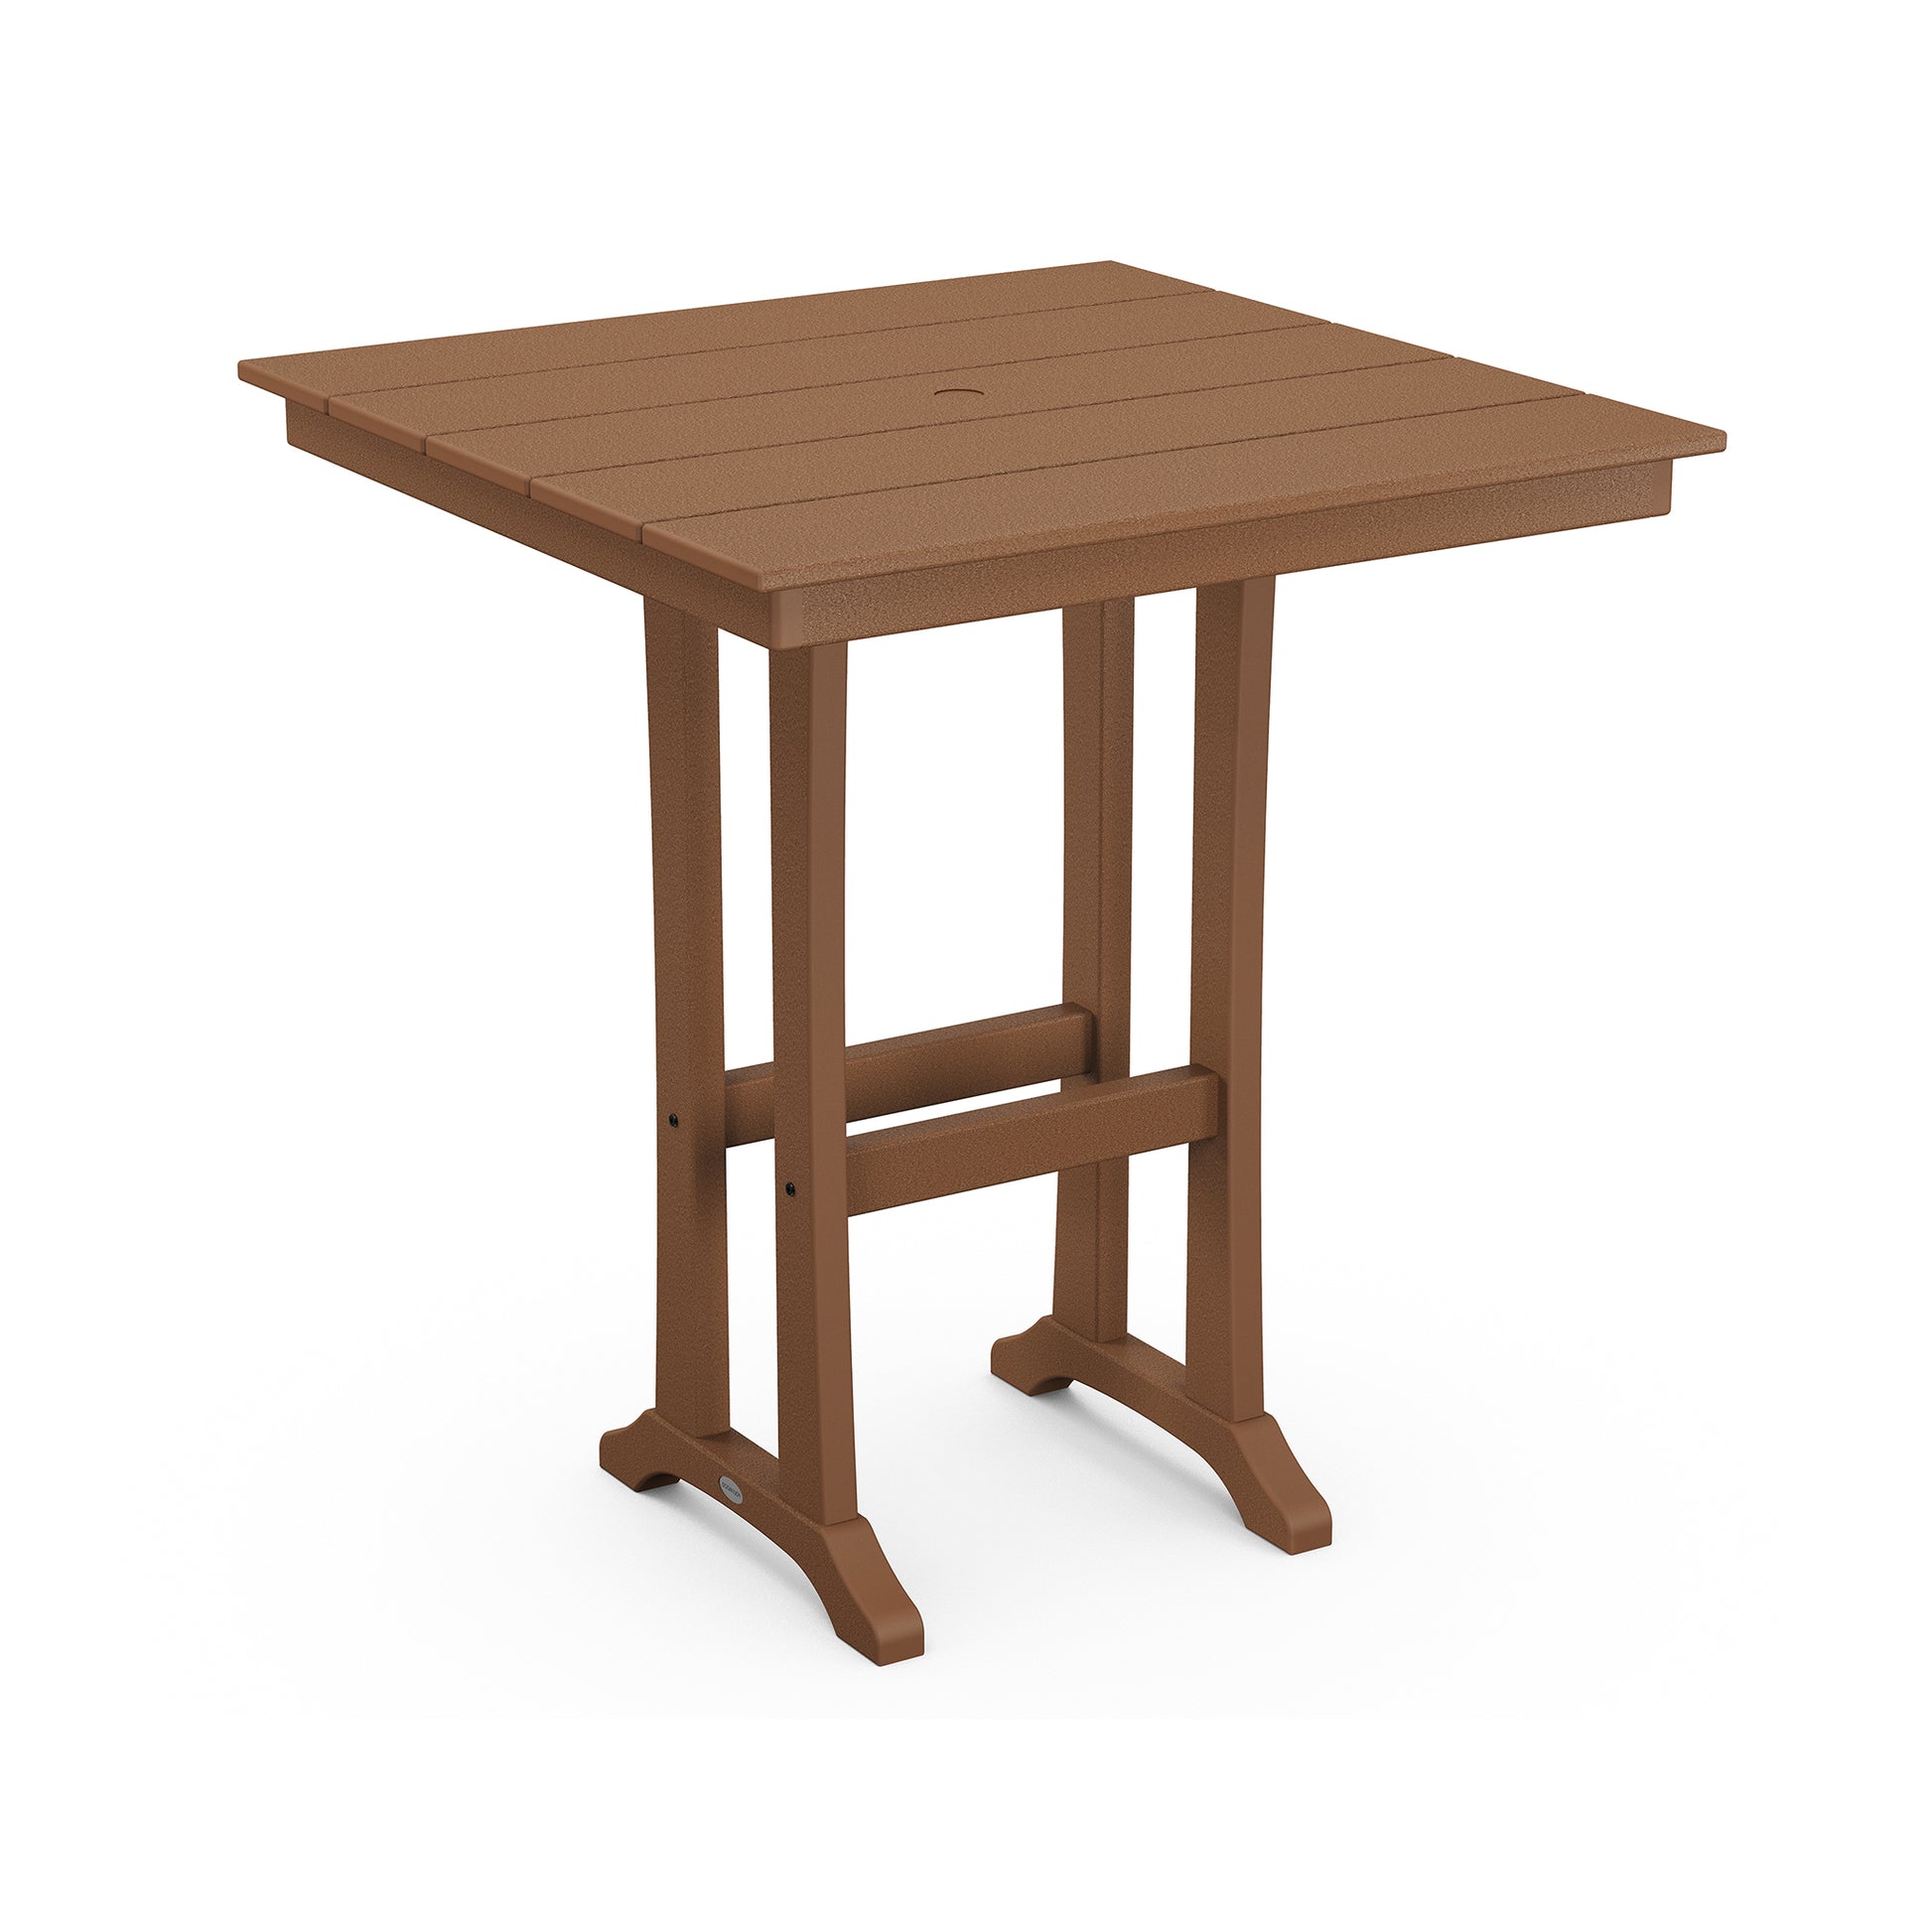 A 3D rendering of a simple brown POLYWOOD Farmhouse Trestle 37" Bar Table with a square top and sturdy legs, isolated on a white background.